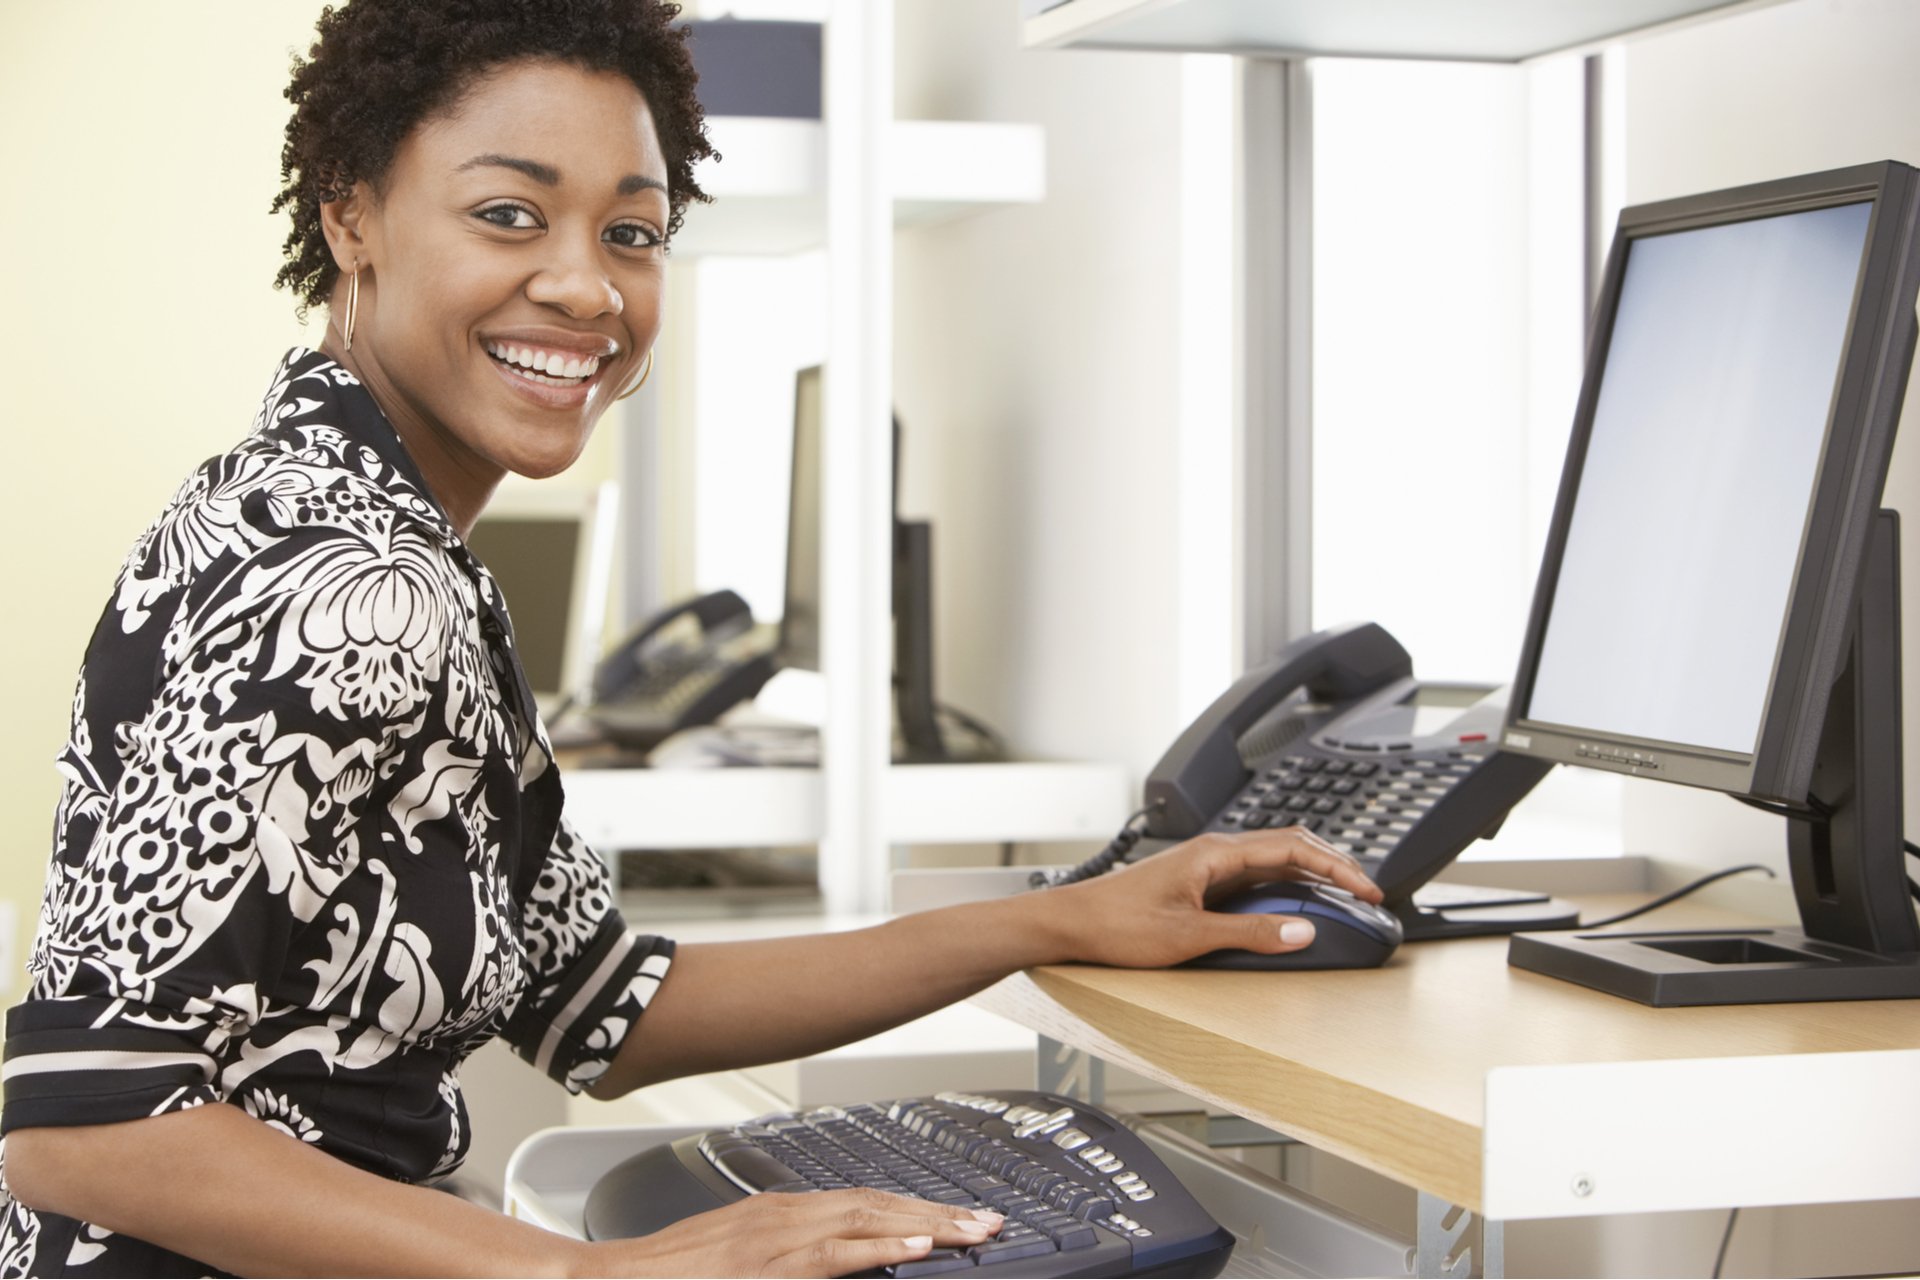 Portrait of smiling young businesswoman typing on computer keyboard in office